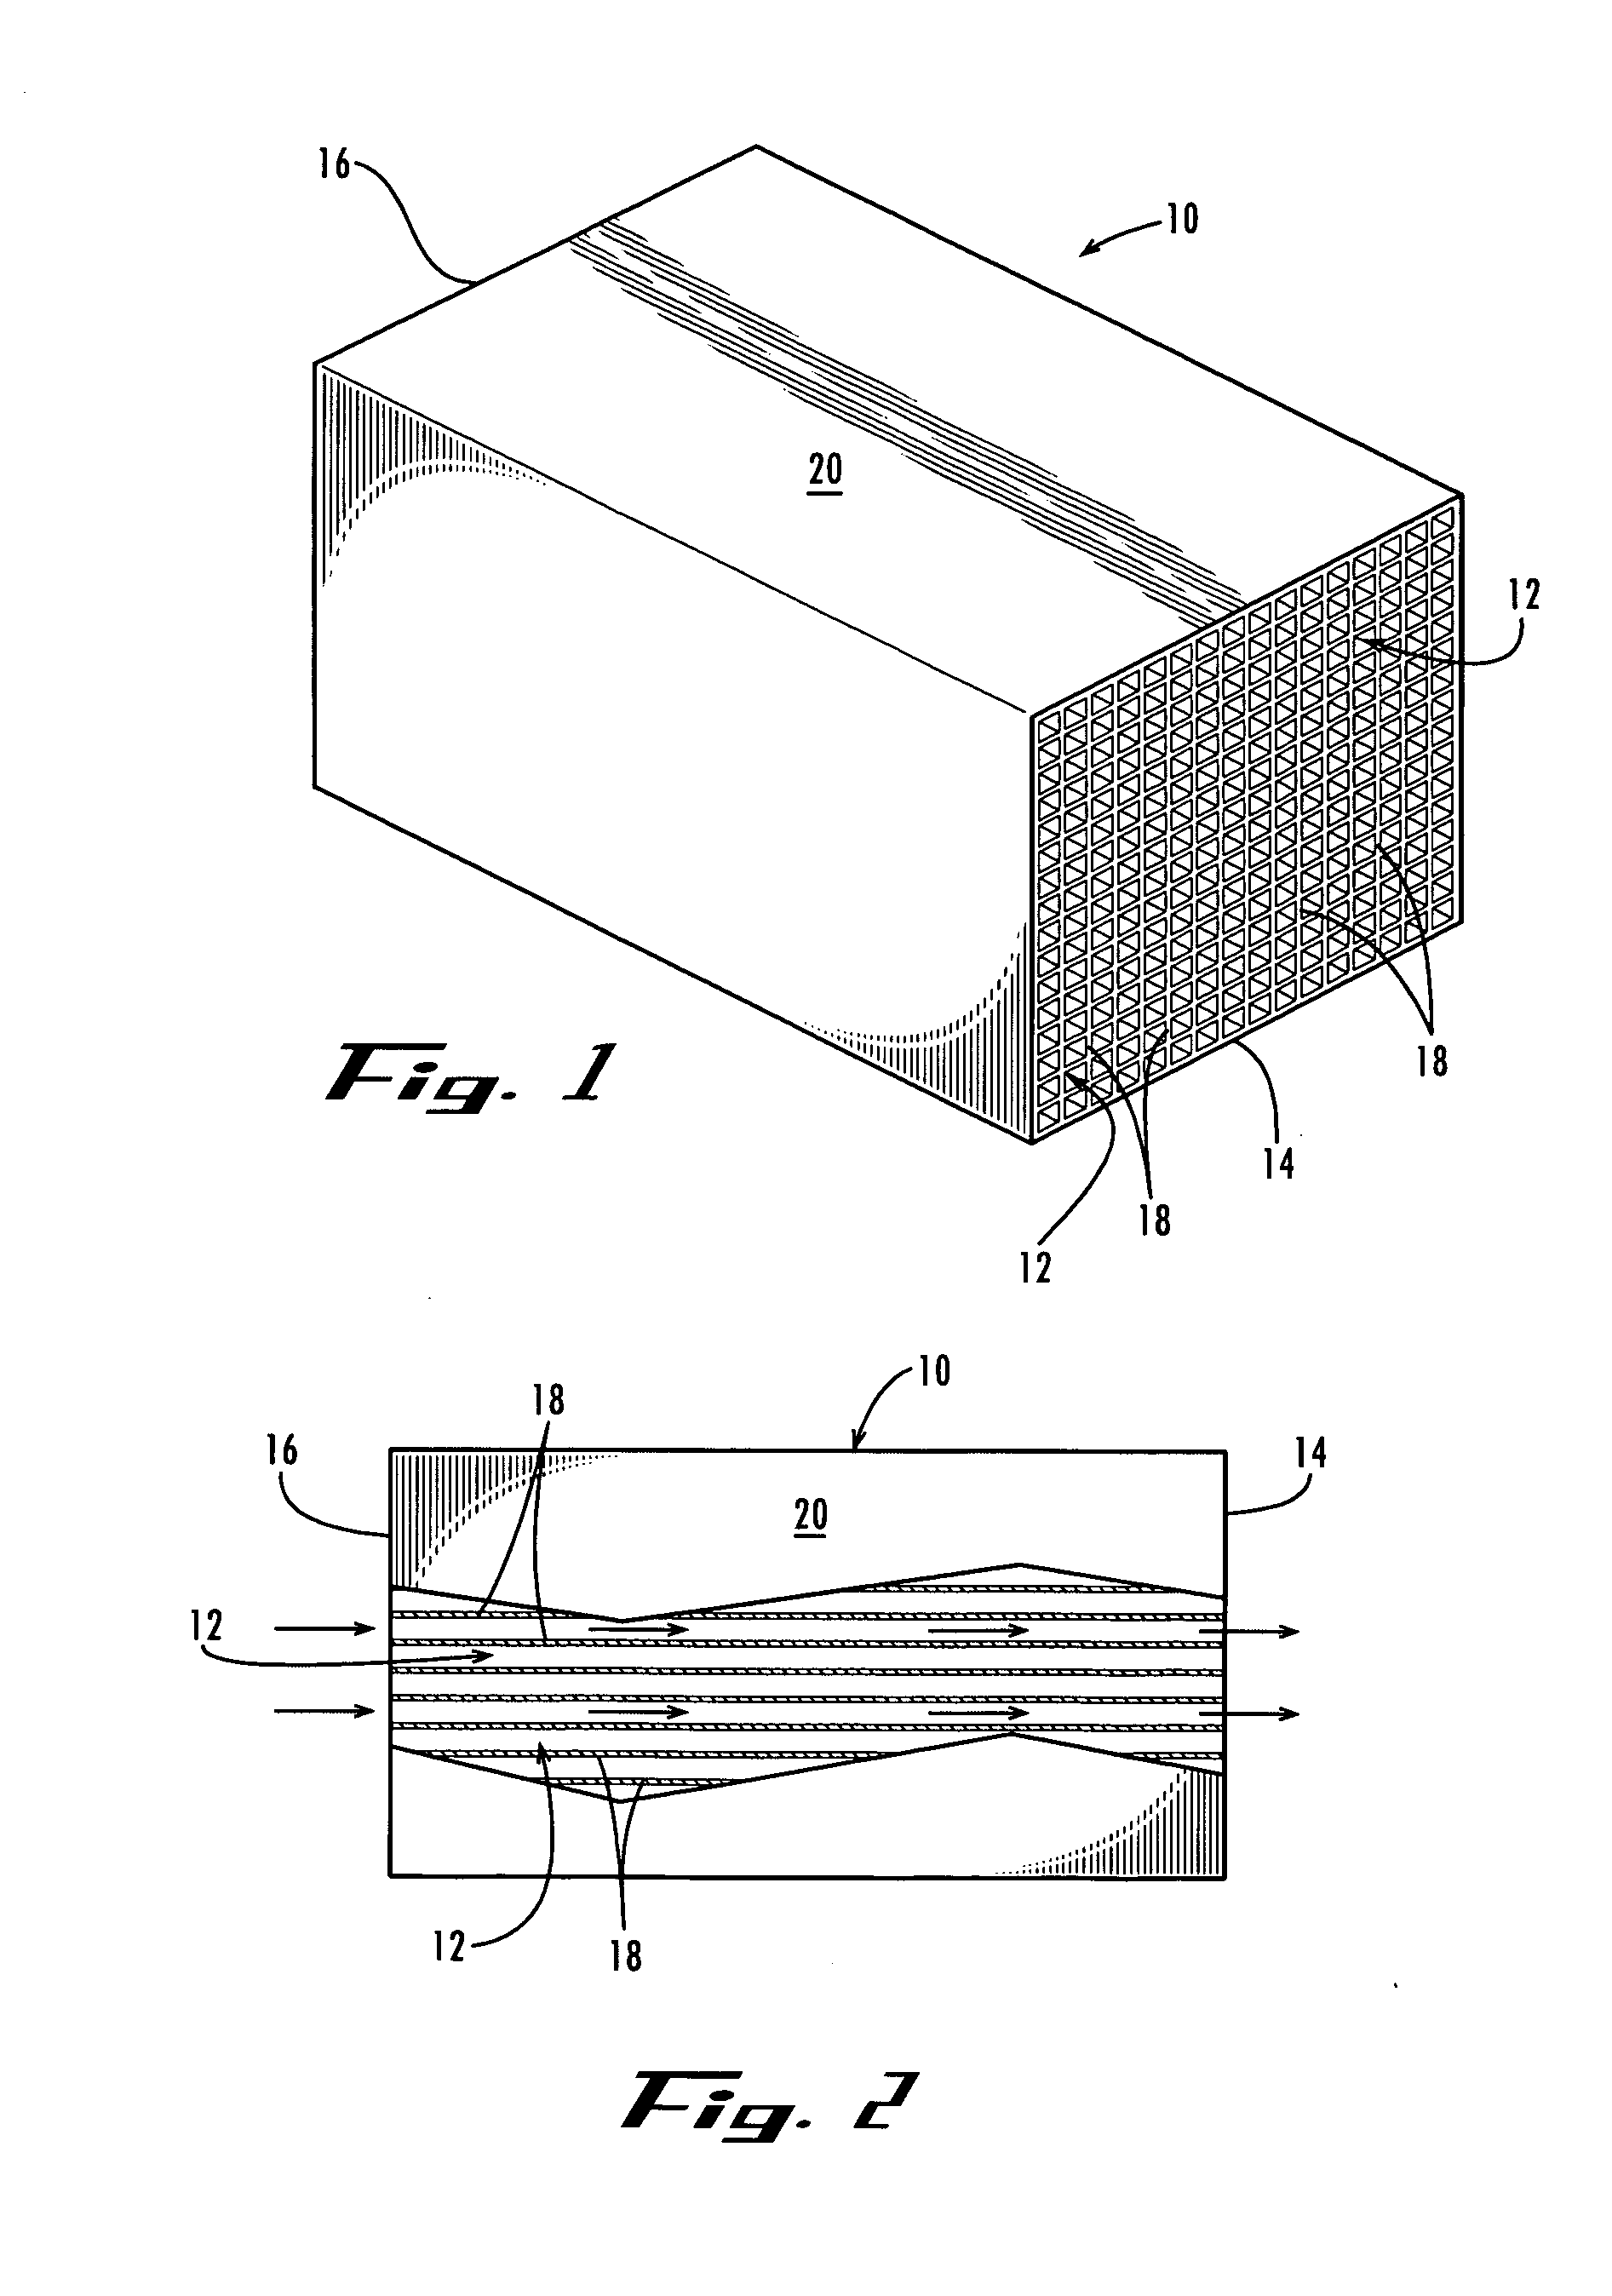 Activated carbon monolith catalyst, methods for making same, and uses thereof